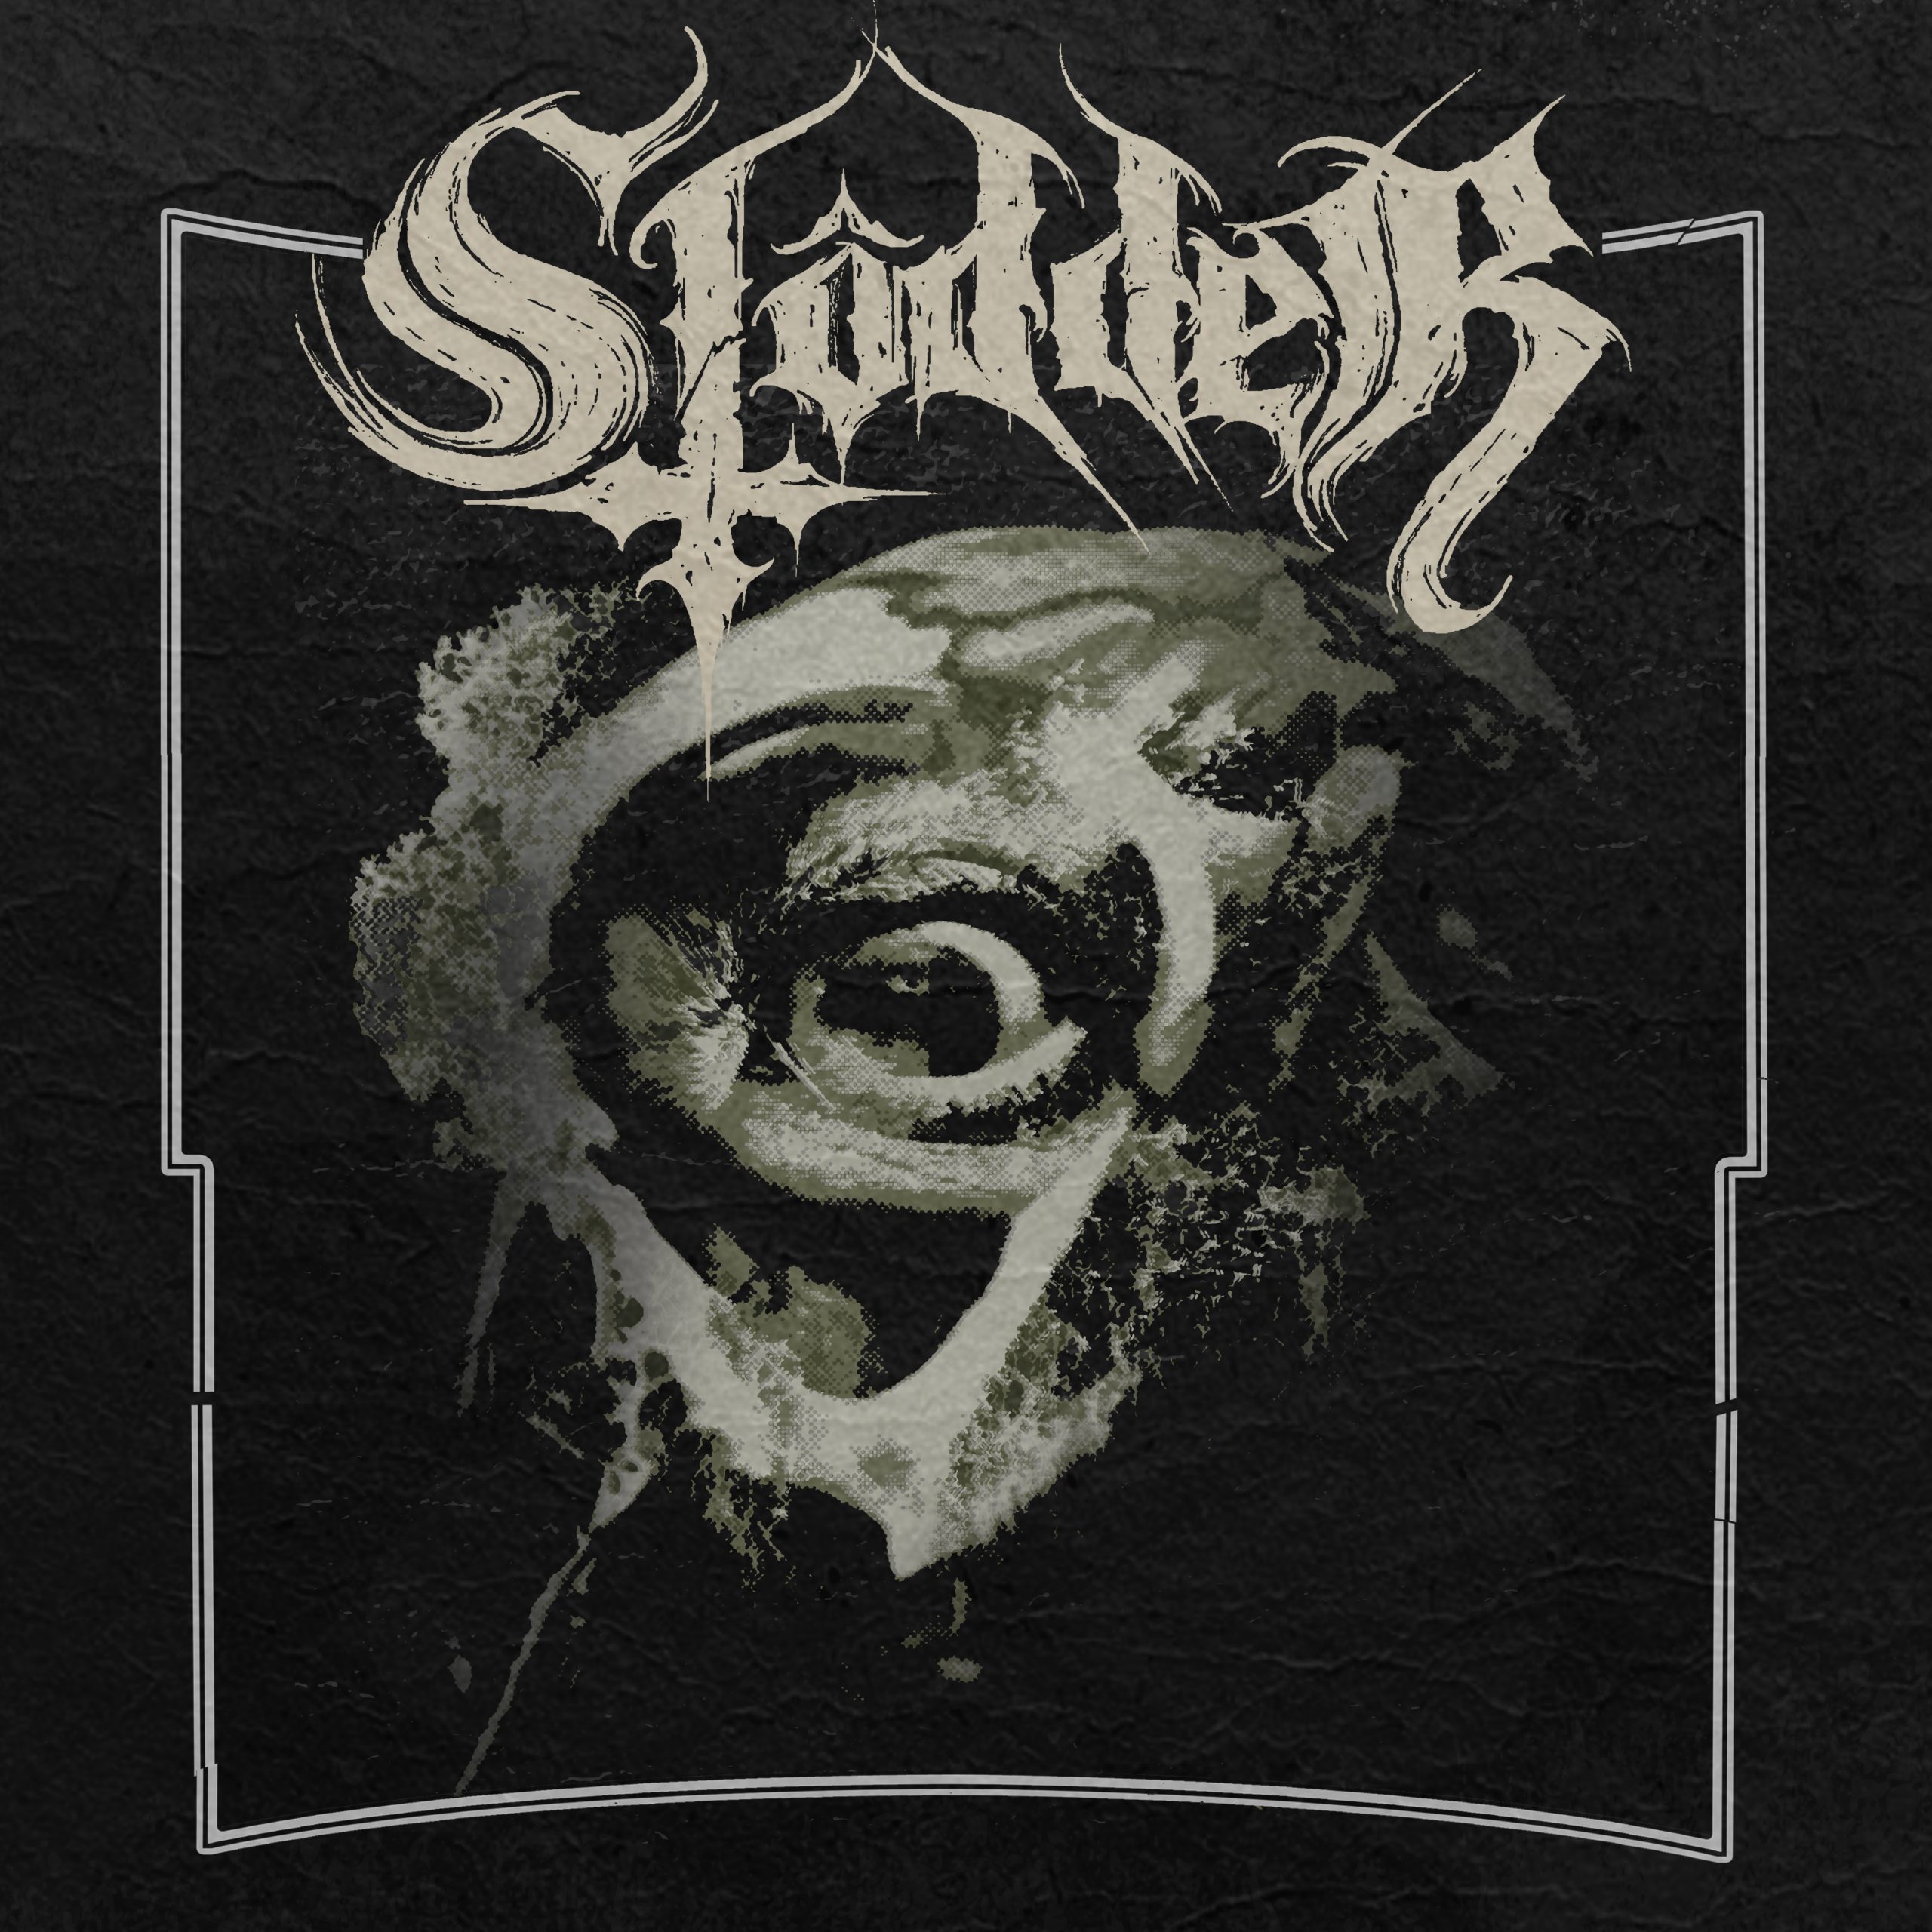 Slôdder – A Mind Designed to Destroy Beautiful Things